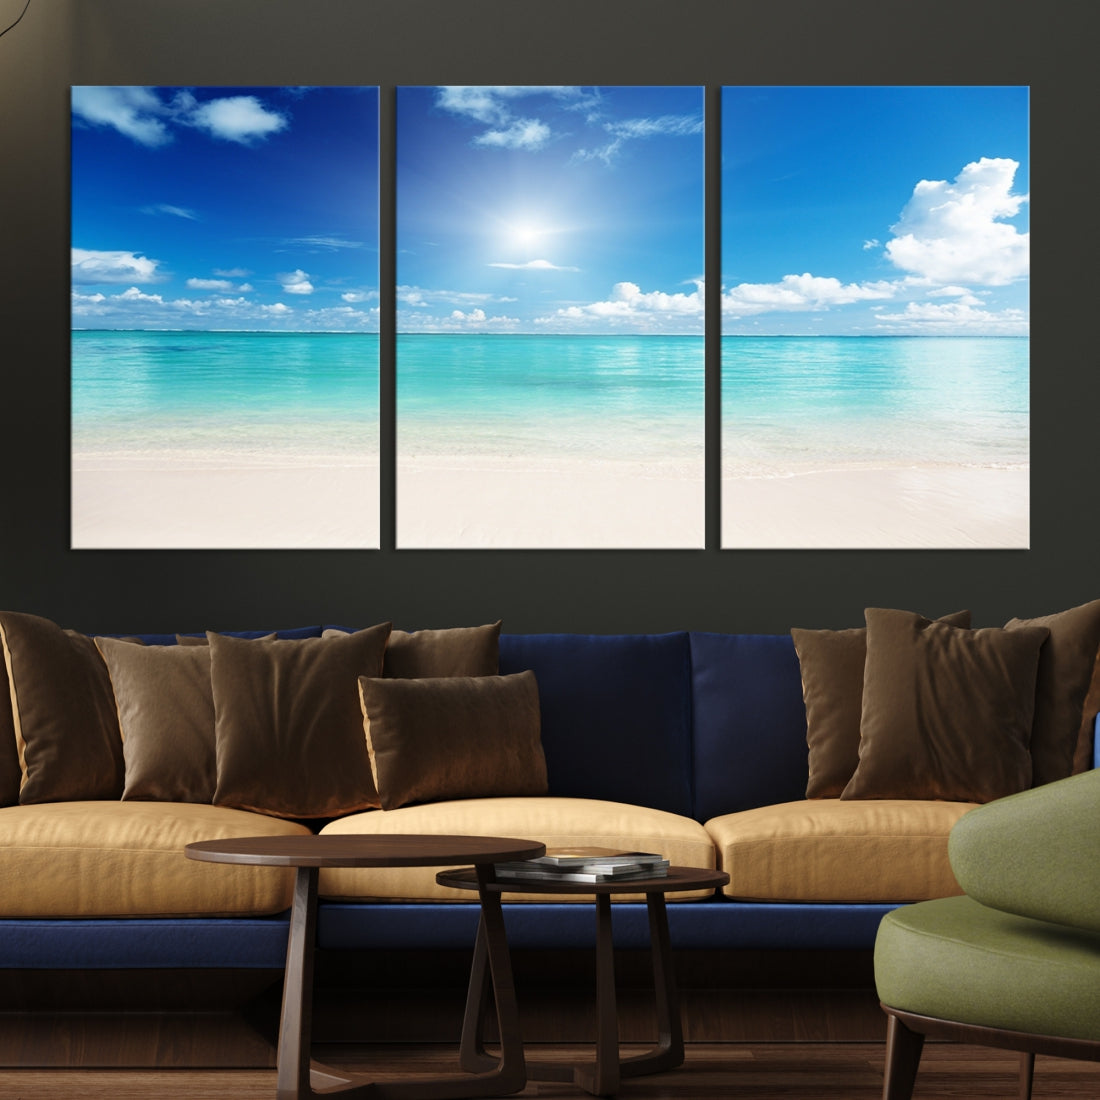 Large Wall Art Canvas Light Blue Beach and Ocean View for Dining Living Bedroom Office Decor